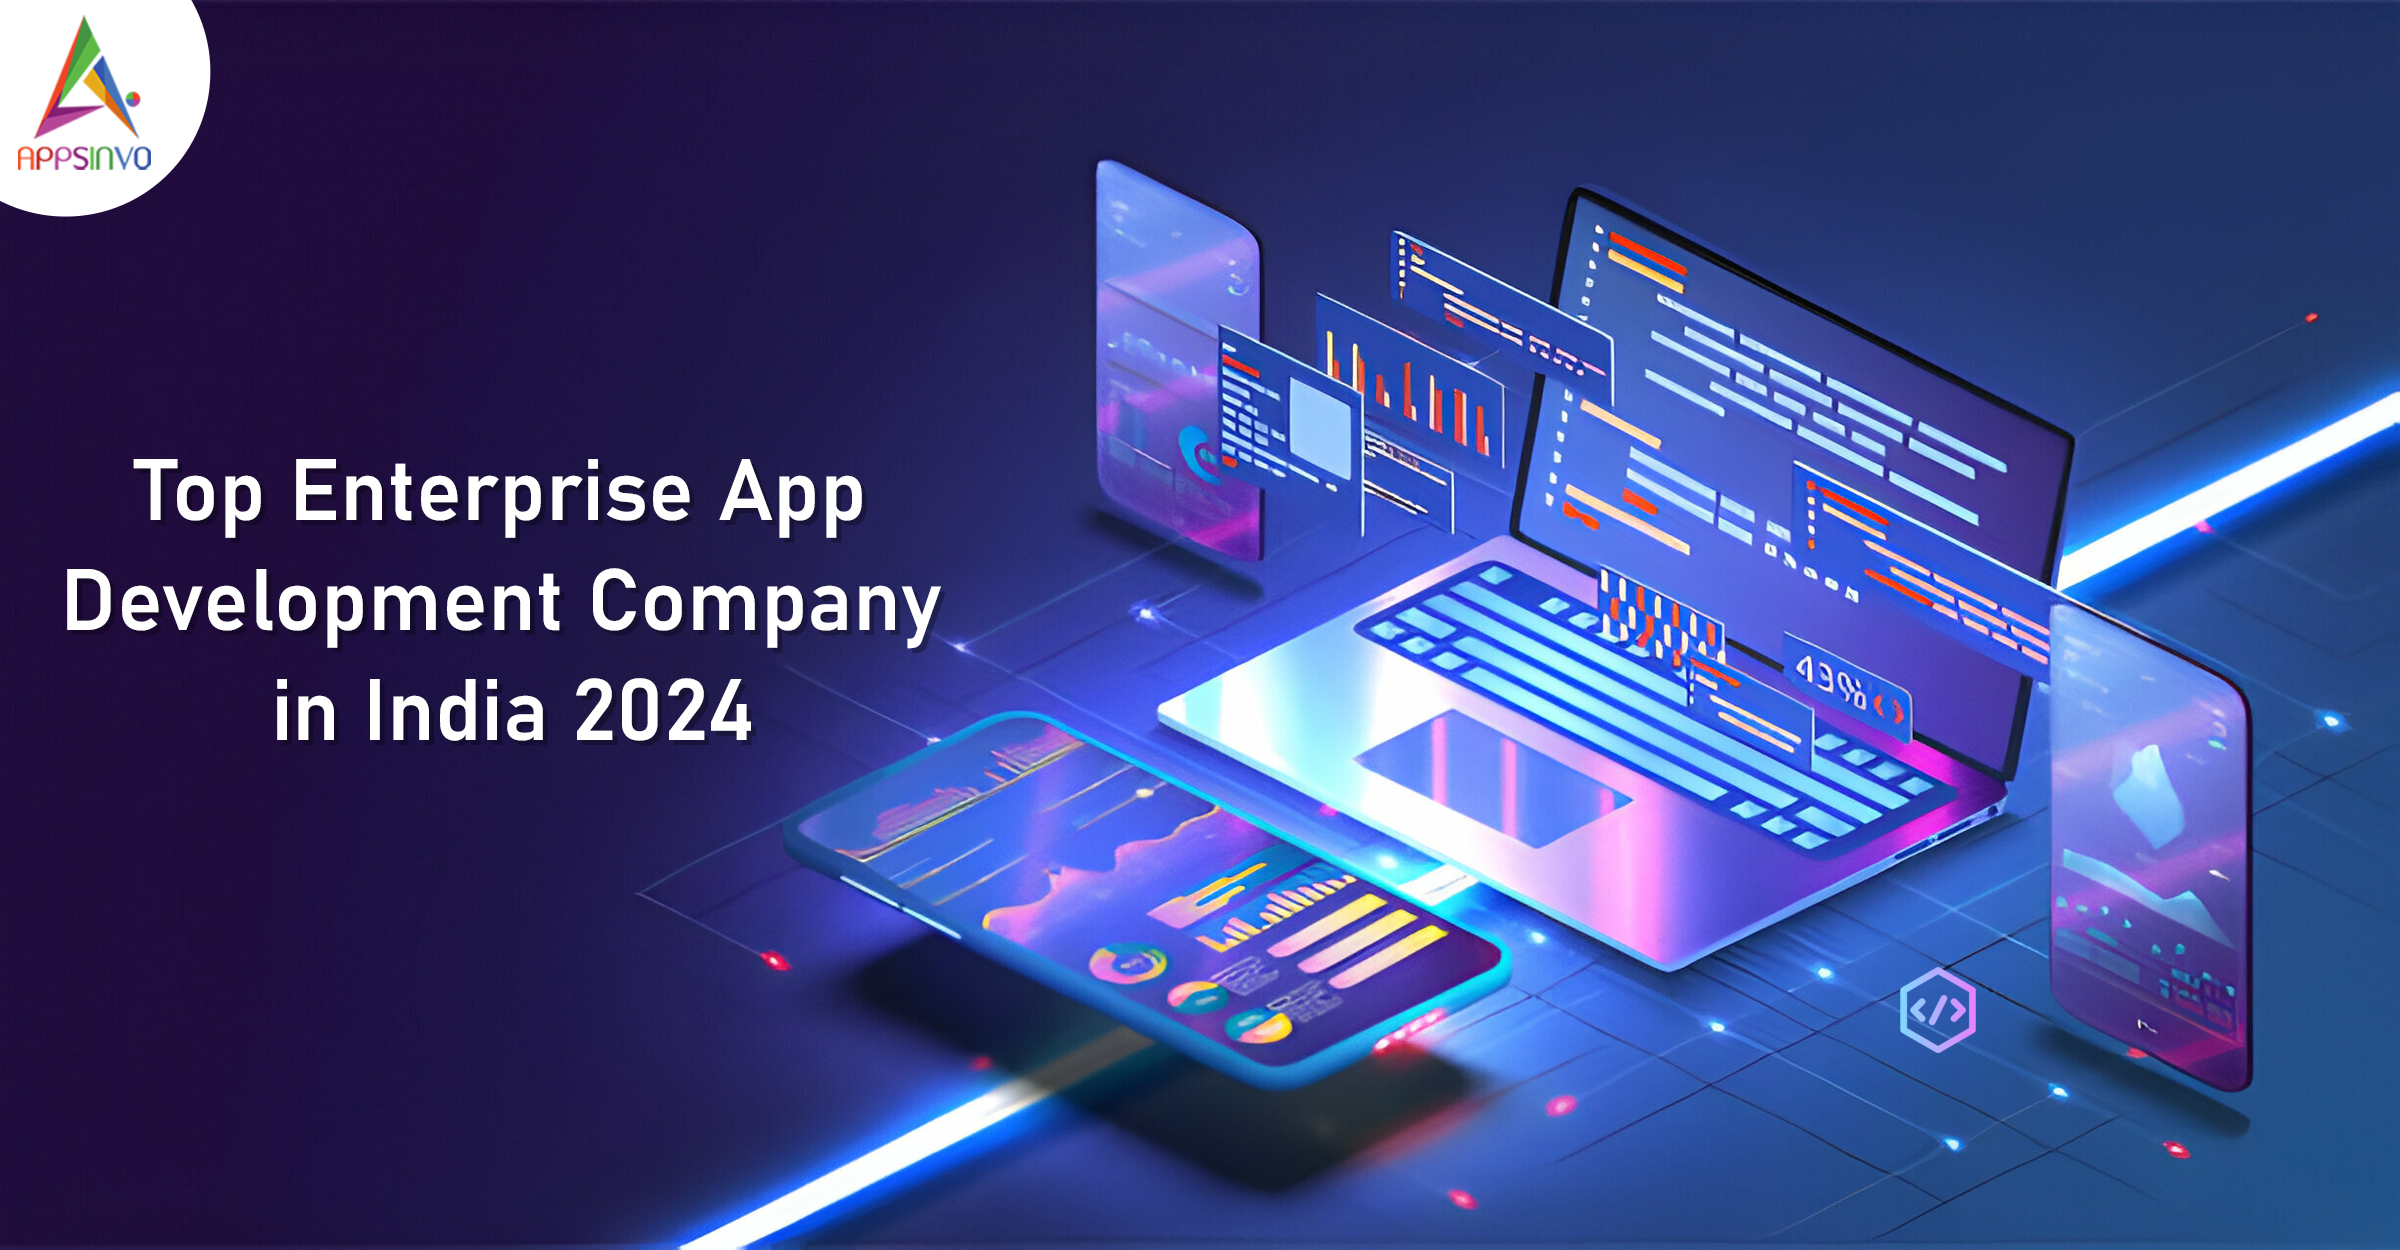 Top Enterprise App Development Company in India 2024 | Appsinvo,Noida,Services,Free Classifieds,Post Free Ads,77traders.com